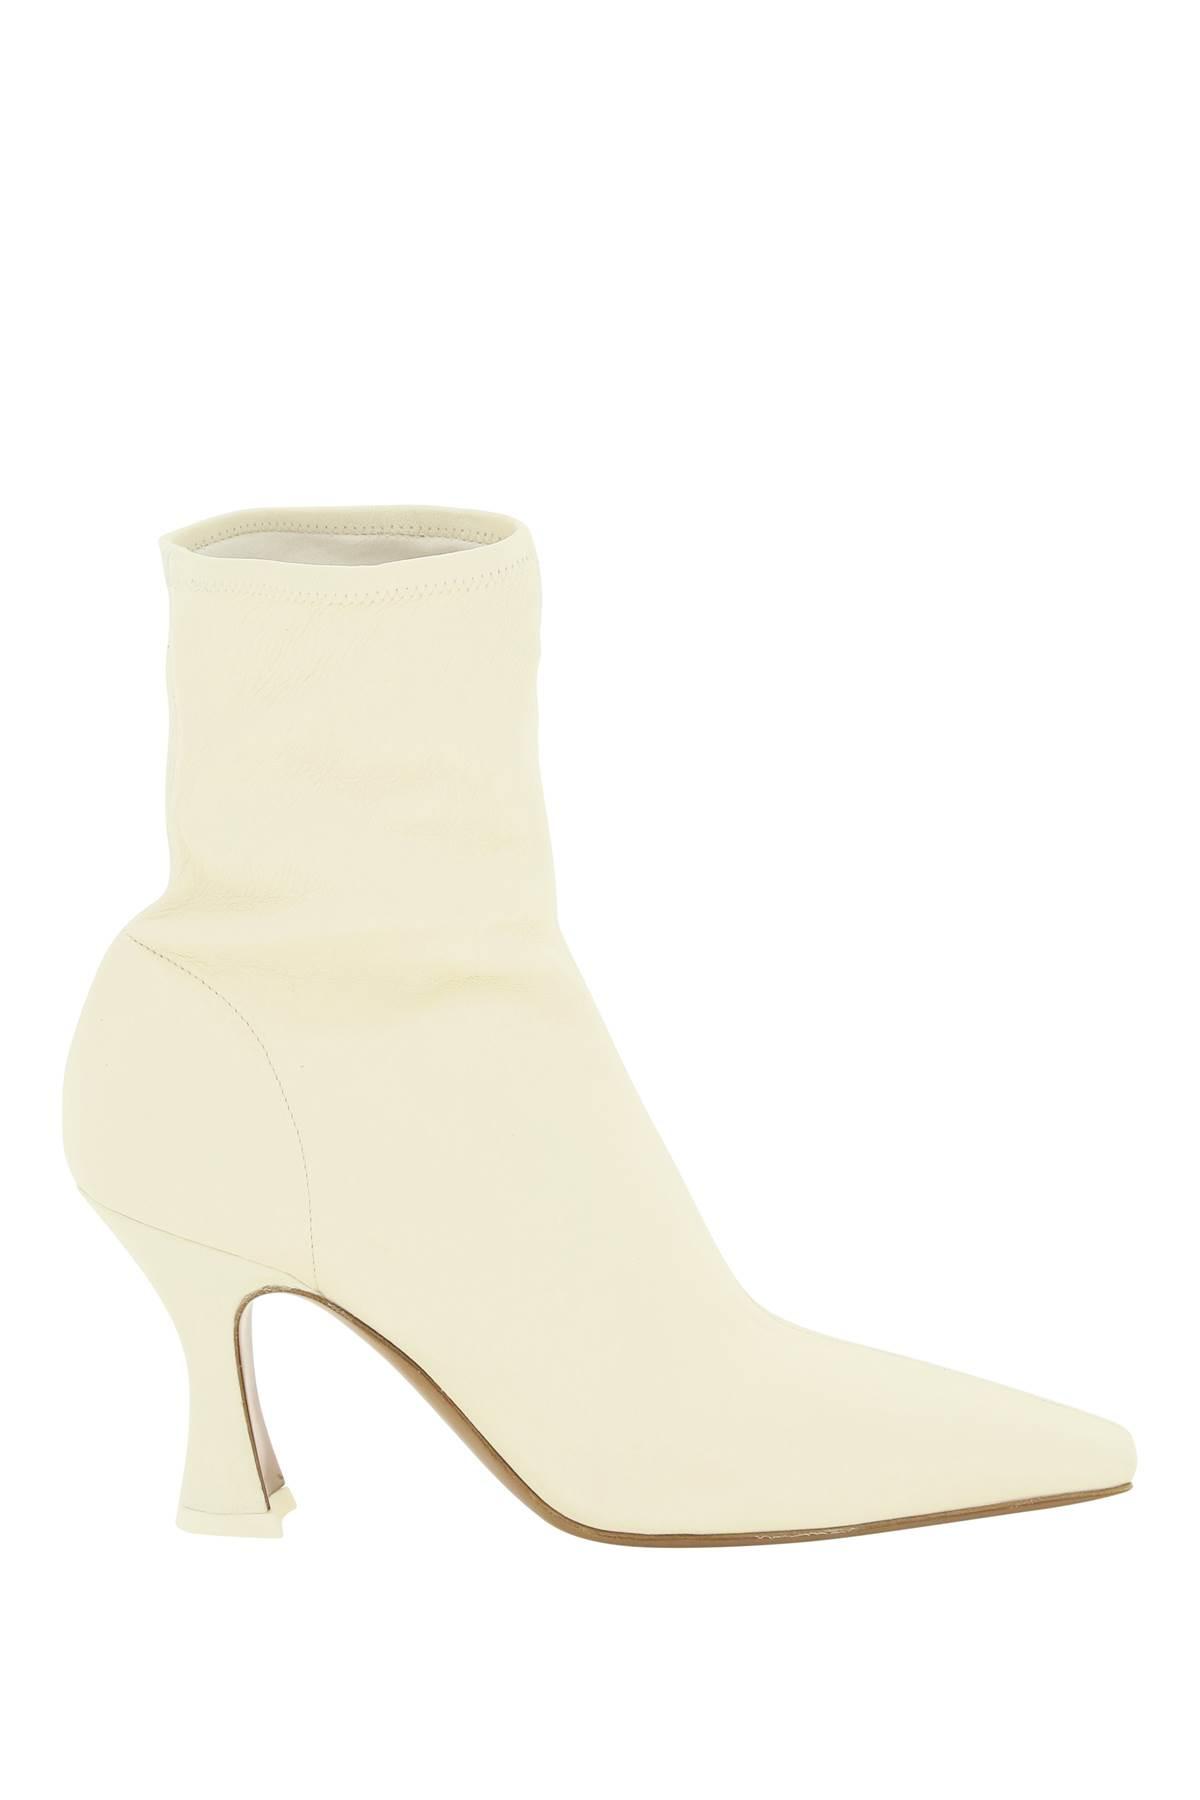 Neous Ran Nappa Leather Ankle Boot in Natural | Lyst